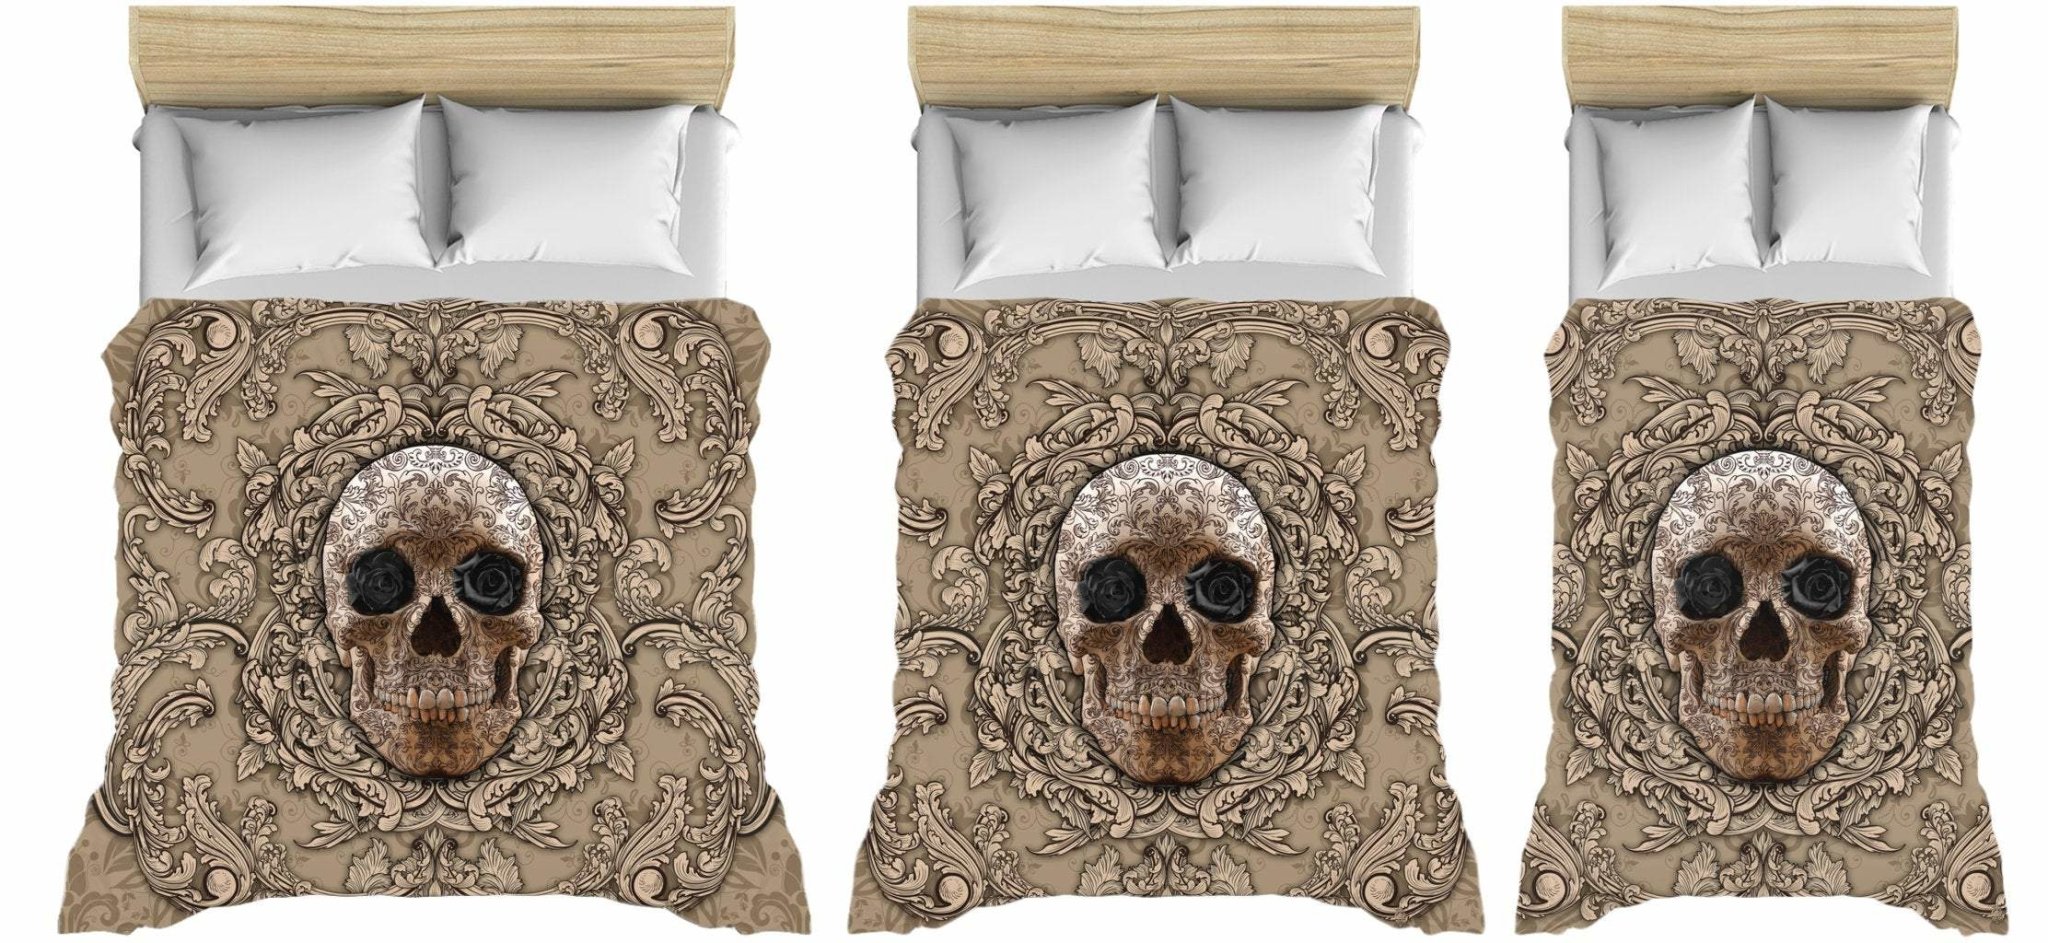 Skull Bedding Set, Comforter and Duvet, Goth Bed Cover and Bedroom Decor, King, Queen and Twin Size - Cream, Black Roses - Abysm Internal